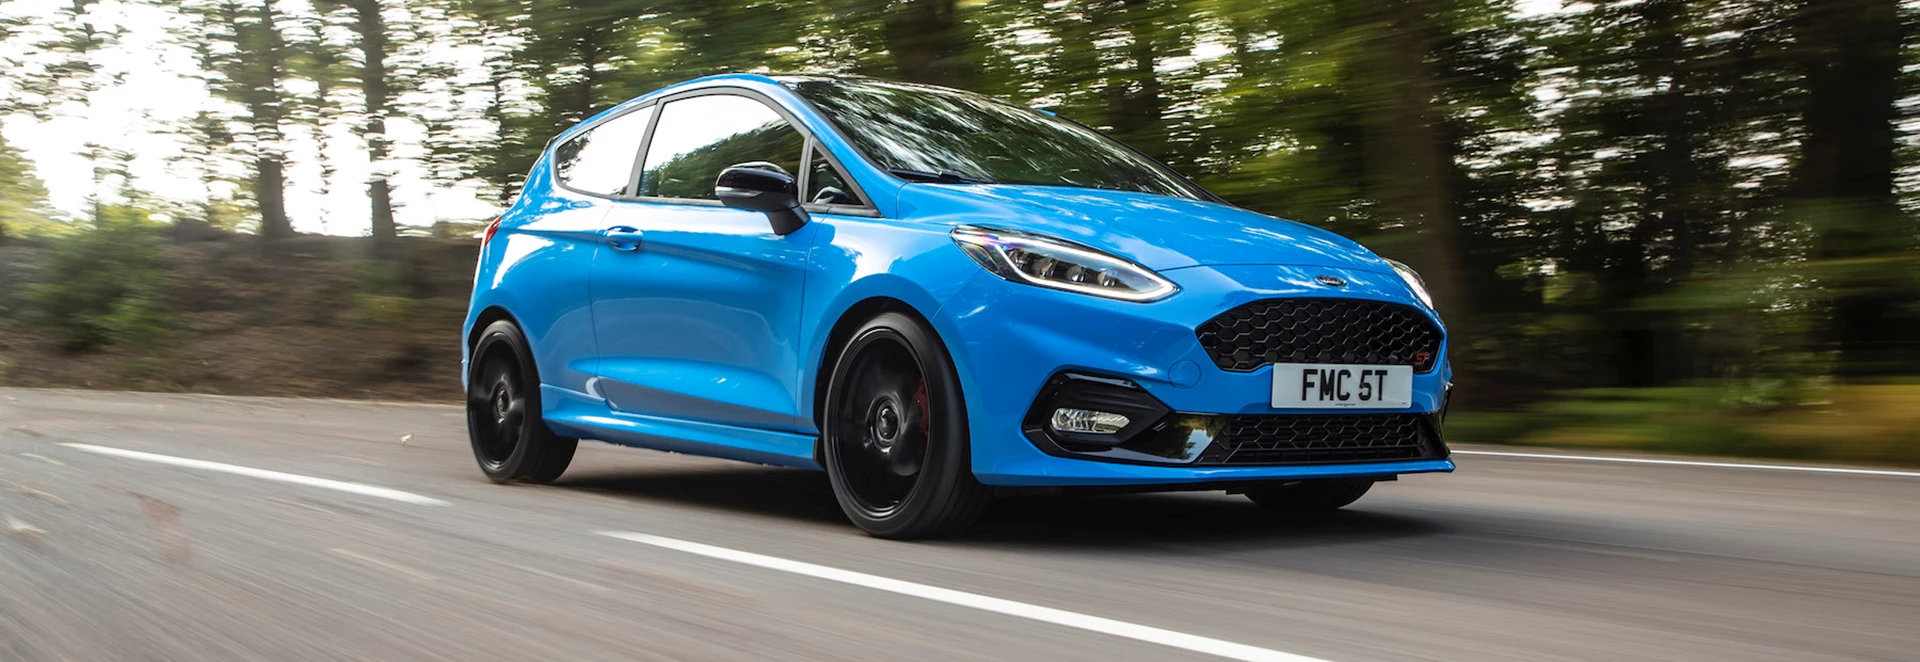 5 things you need to know about the Ford Fiesta ST Edition 